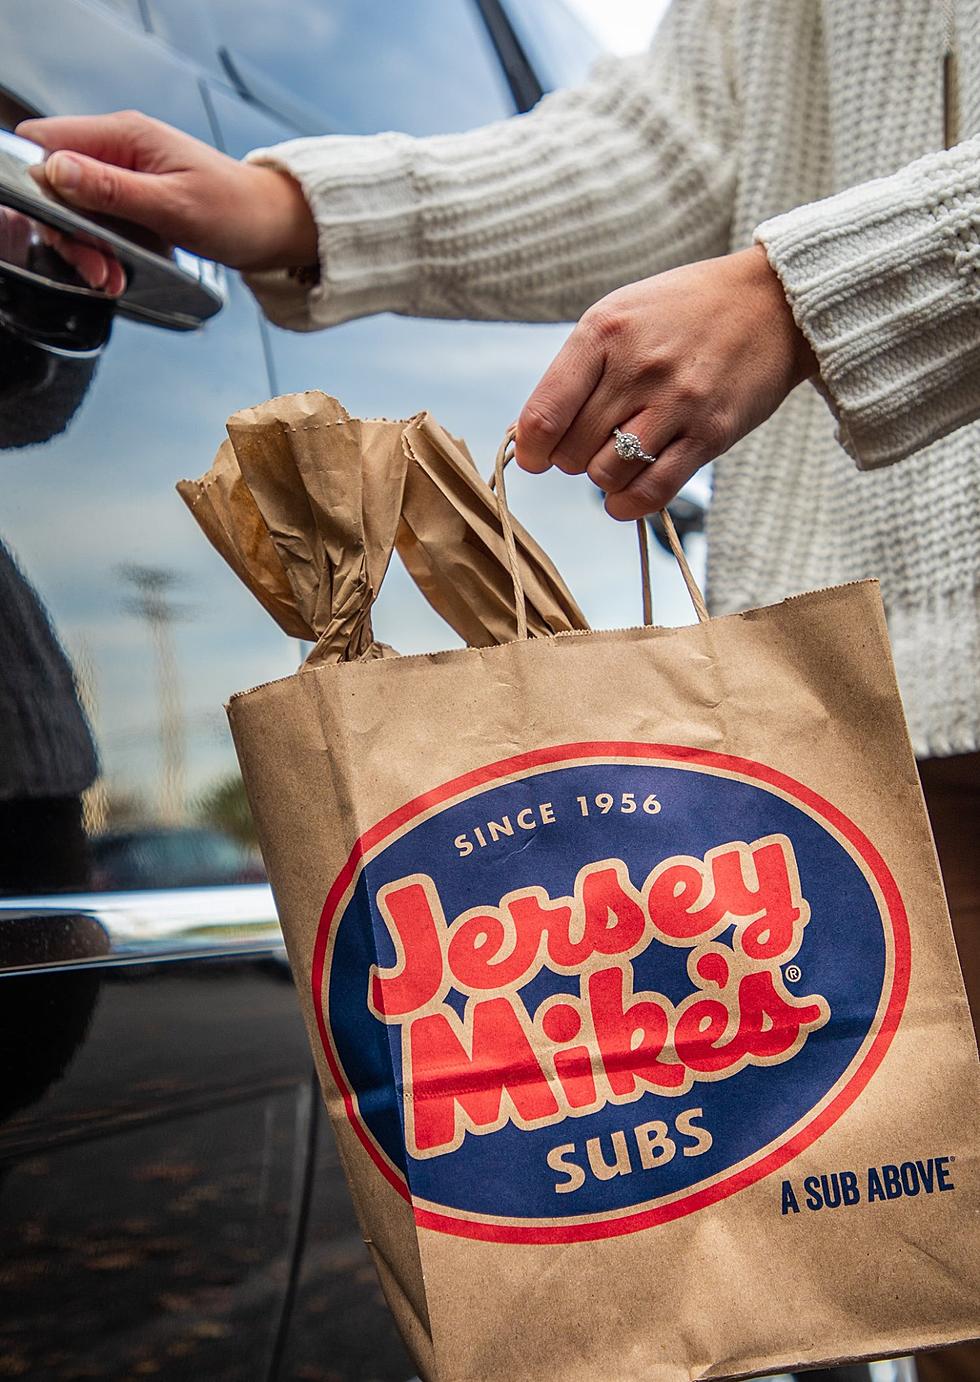 5 Things You Didn’t Know About Jersey Mike’s Subs